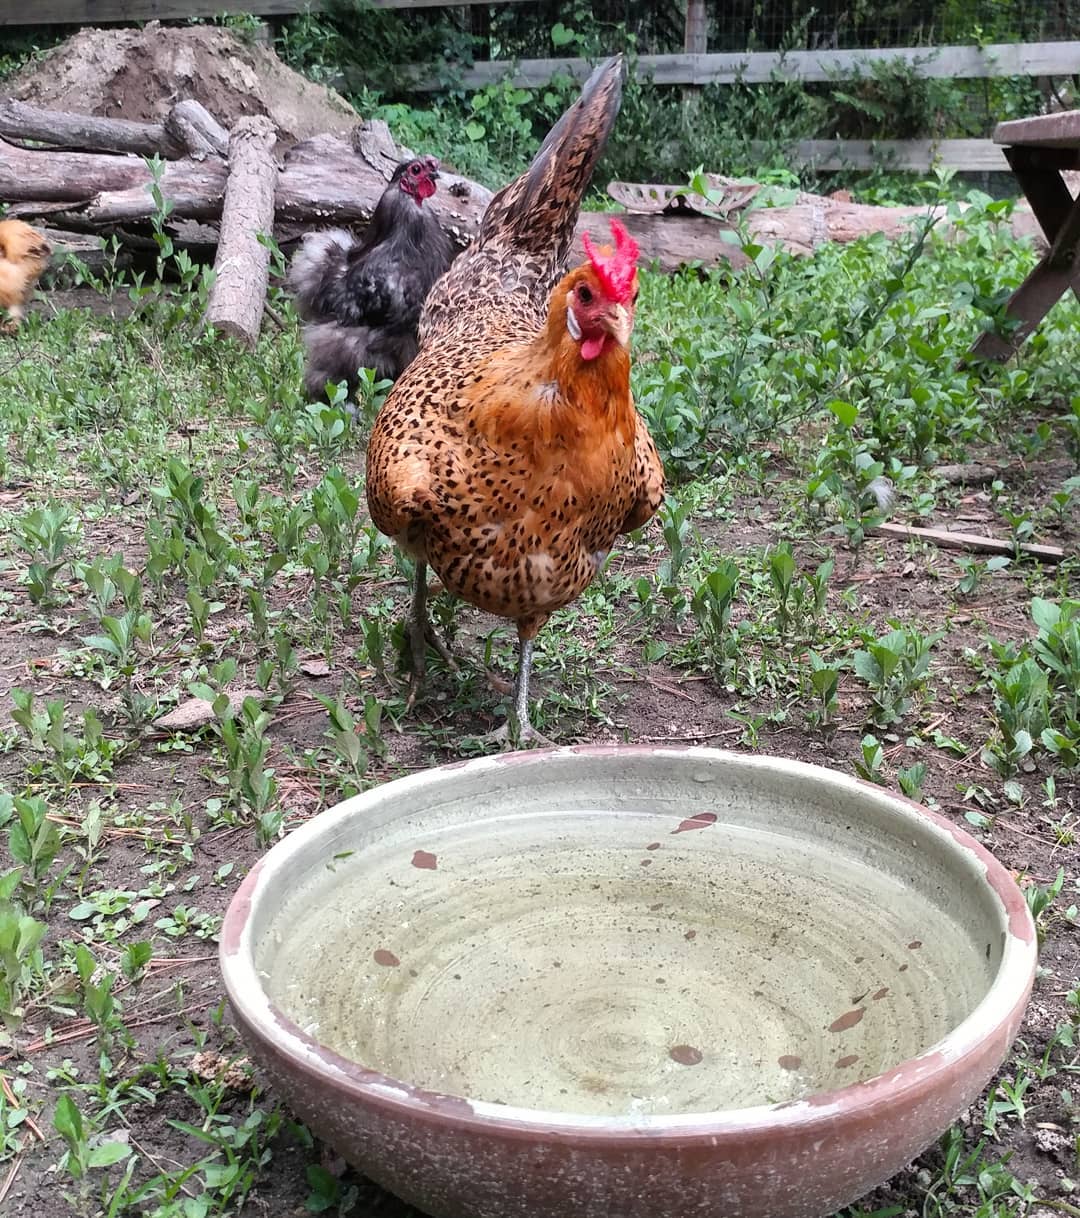 Thank goodness the rain filled this random bowl with water! Every single chicken has had a drink from it tonight. If it weren't for this bowl, where would they get liquids? From those huge waterers I regularly wash and fill? I think not! Ridiculous. Everyone knows the best water is from mud puddles. Random bowls are a distant second.